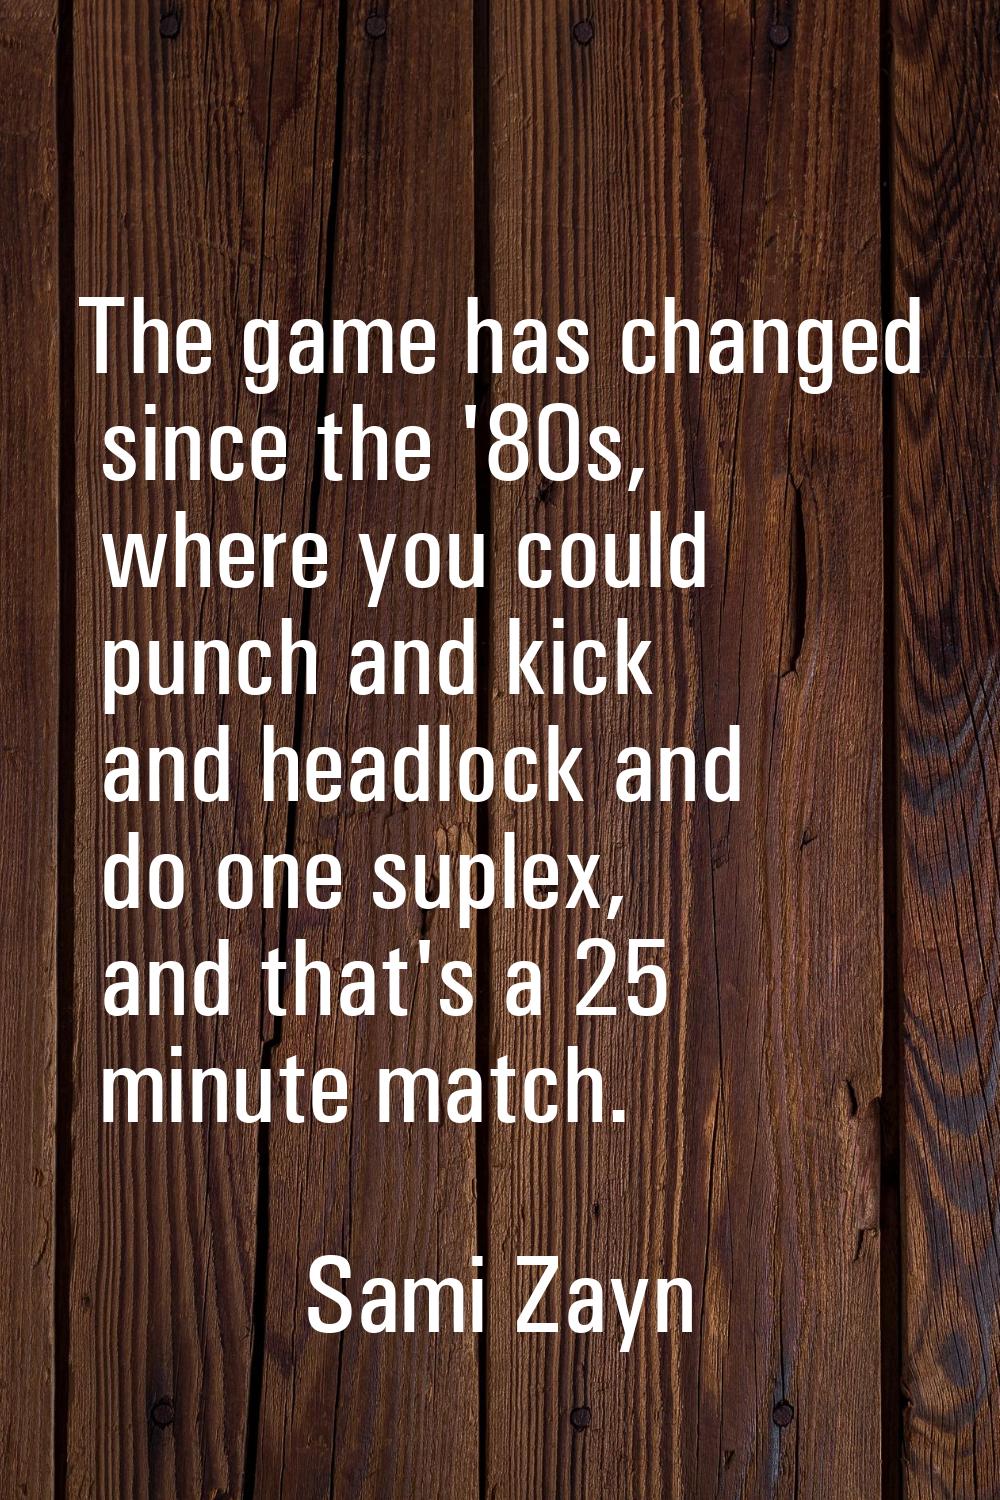 The game has changed since the '80s, where you could punch and kick and headlock and do one suplex,